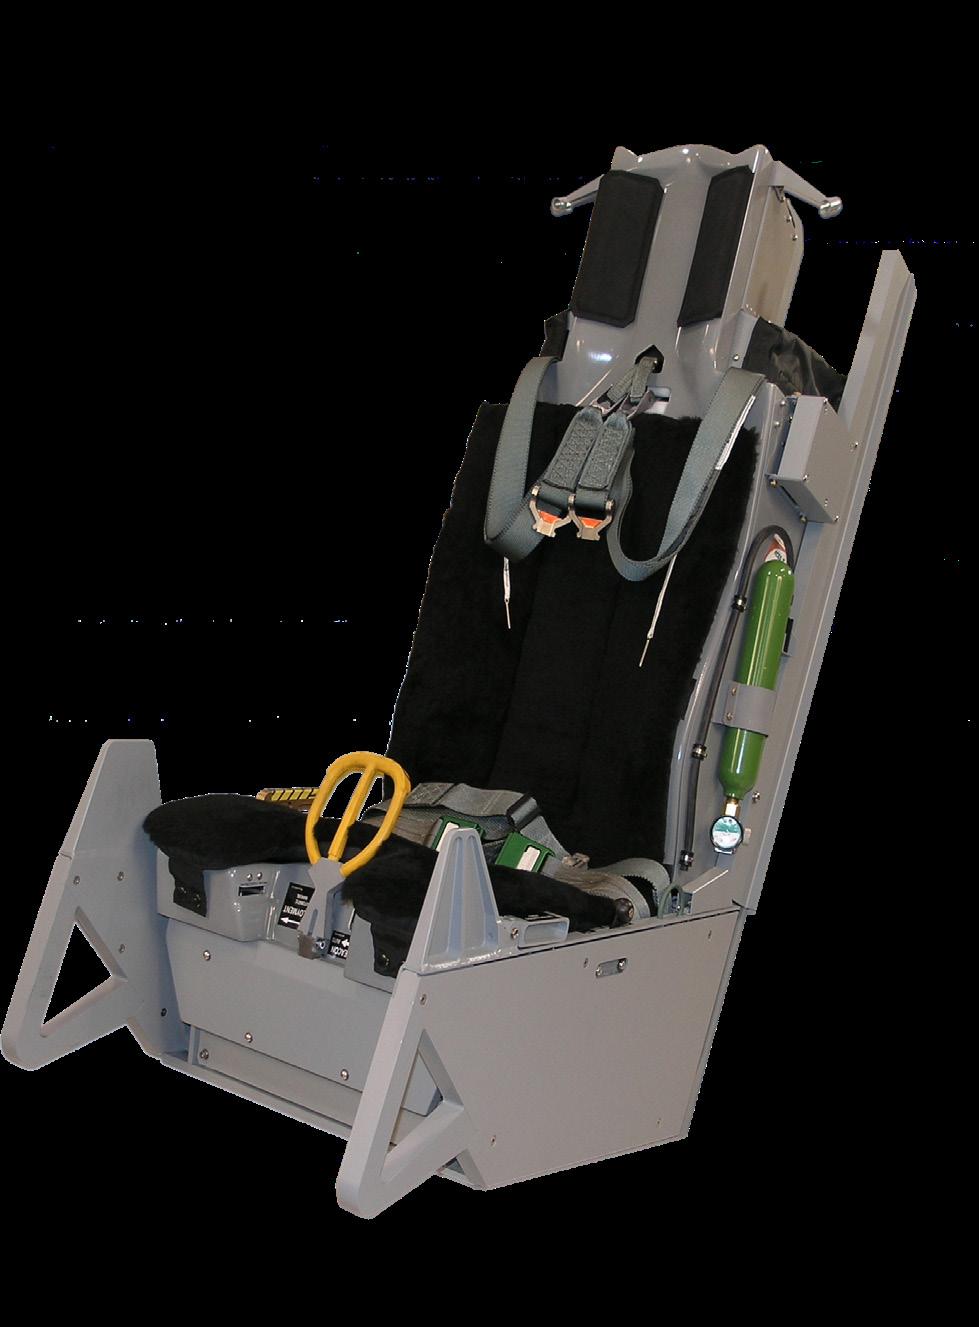 THE SEATS LOOK, FEEL, AND FUNCTION LIKE THE ACTUAL AIRCRAFT EJECTION SEATS DROGUE CHUTE FLAP PITOT TUBES HELMET PADS CHUTE SHROUD SHOULDER HARNESSES BACKPAD CUSHION